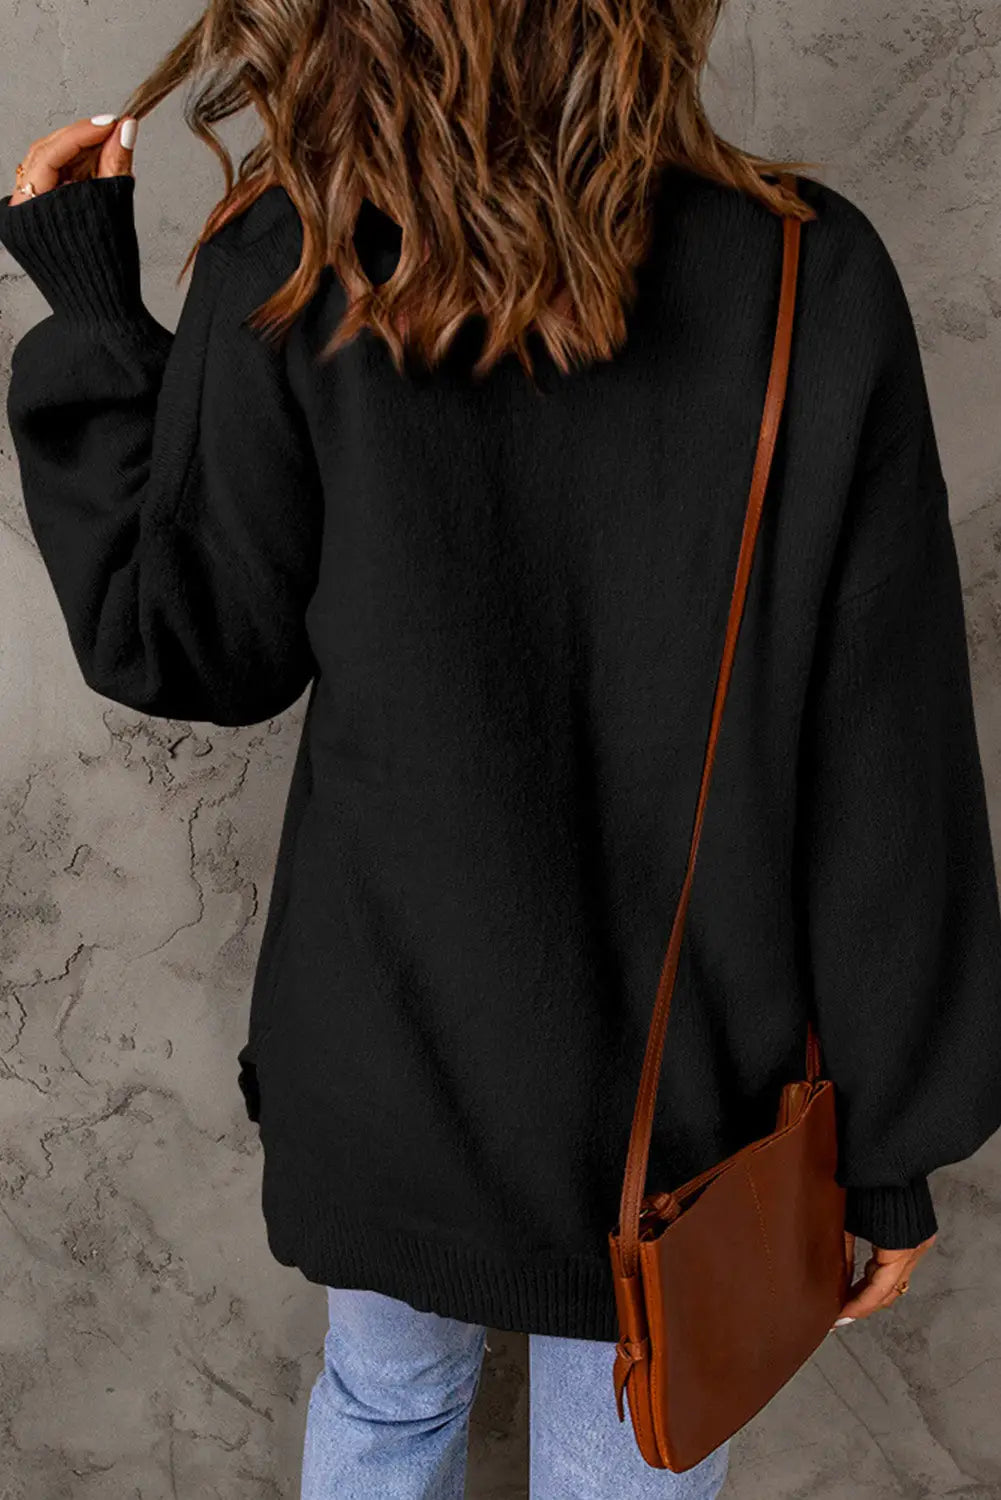 Black solid color puffy sleeve pocketed sweater - tops